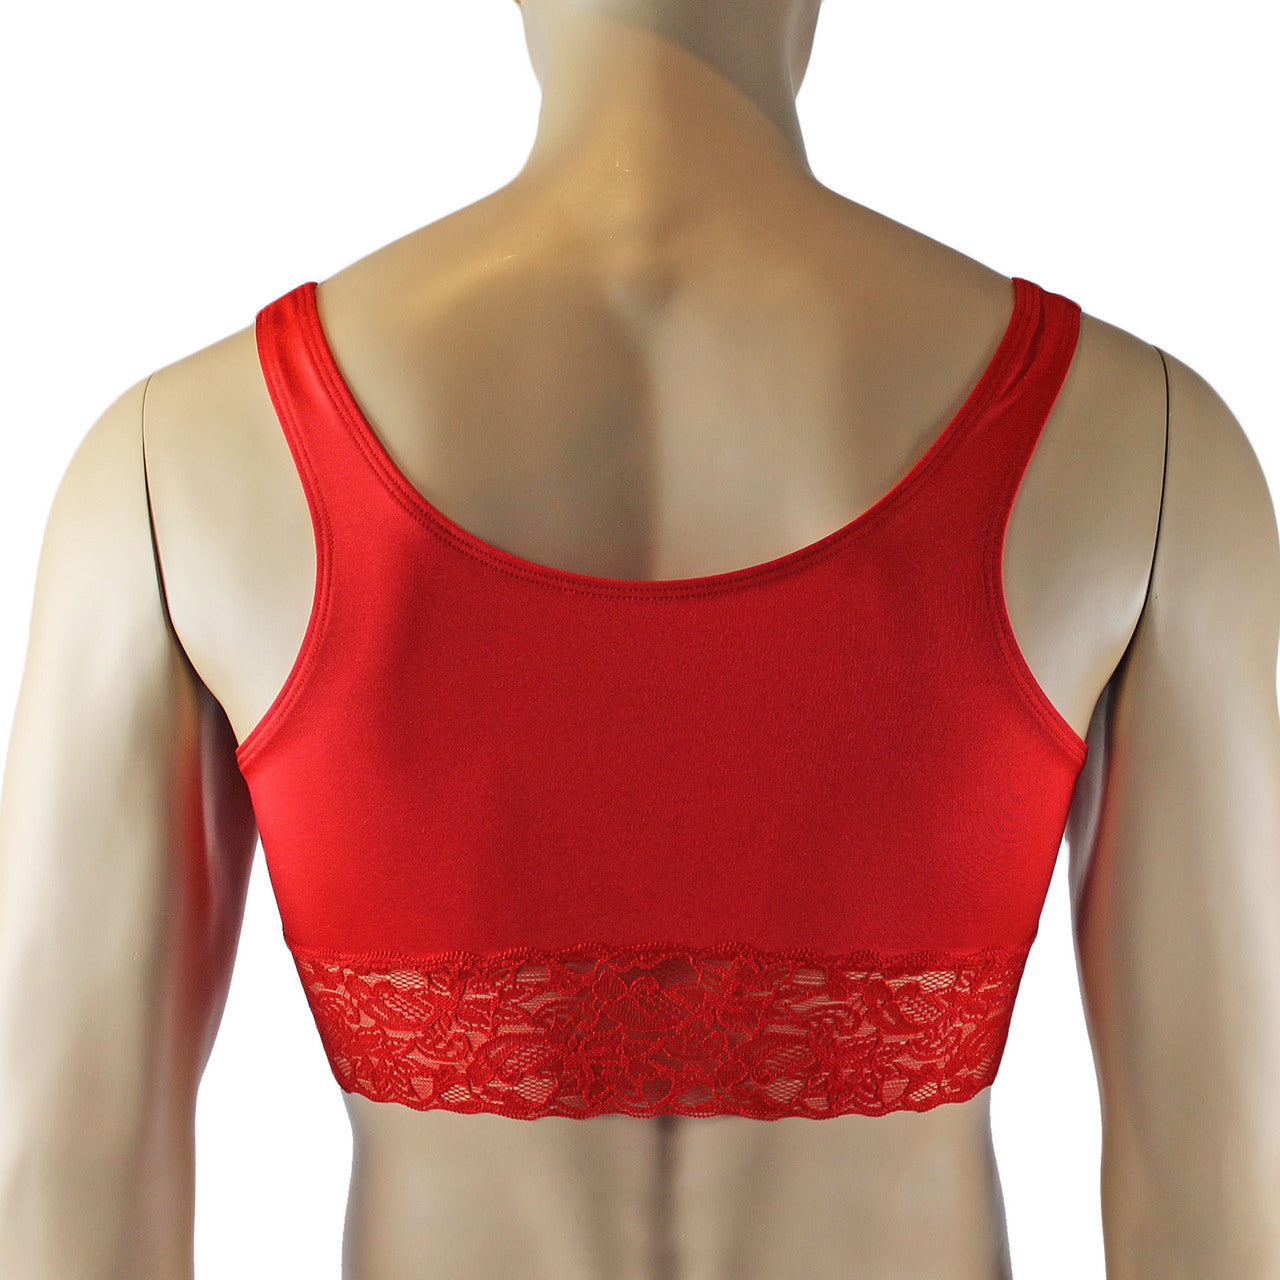 Male Penny Lingerie Bra Camisole Top with Lace Red